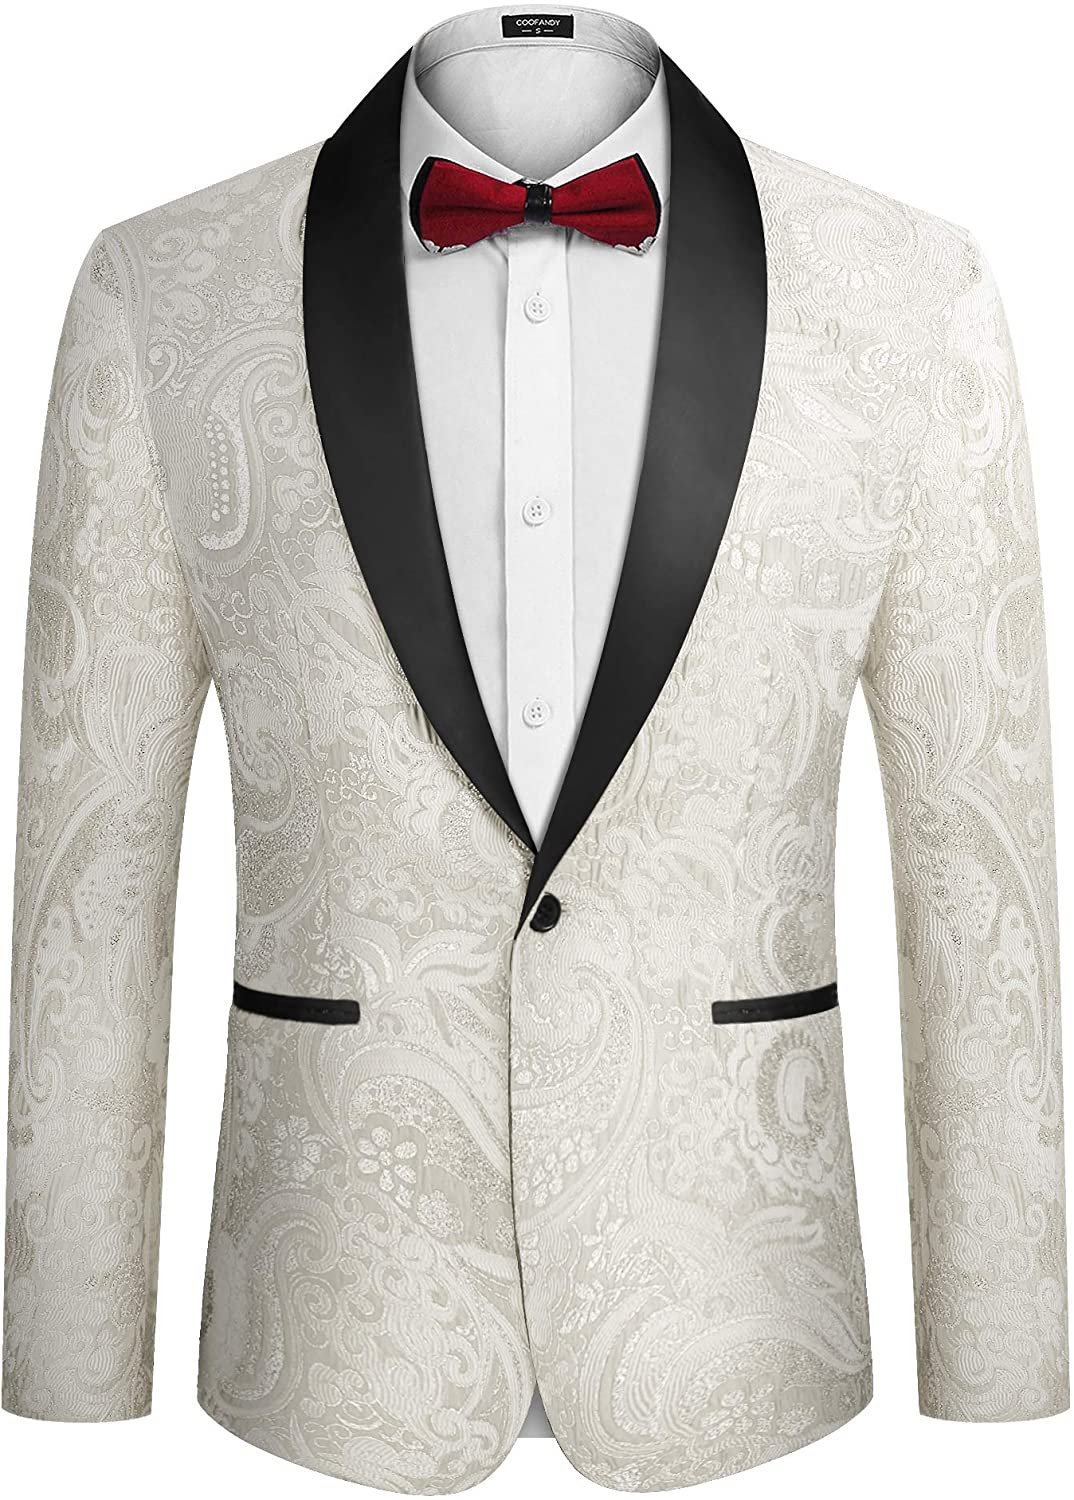 COOFANDY Men's Floral Dress Suit Luxury Embroidered Wedding Blazer Dinner Tuxedo Jacket for Party 